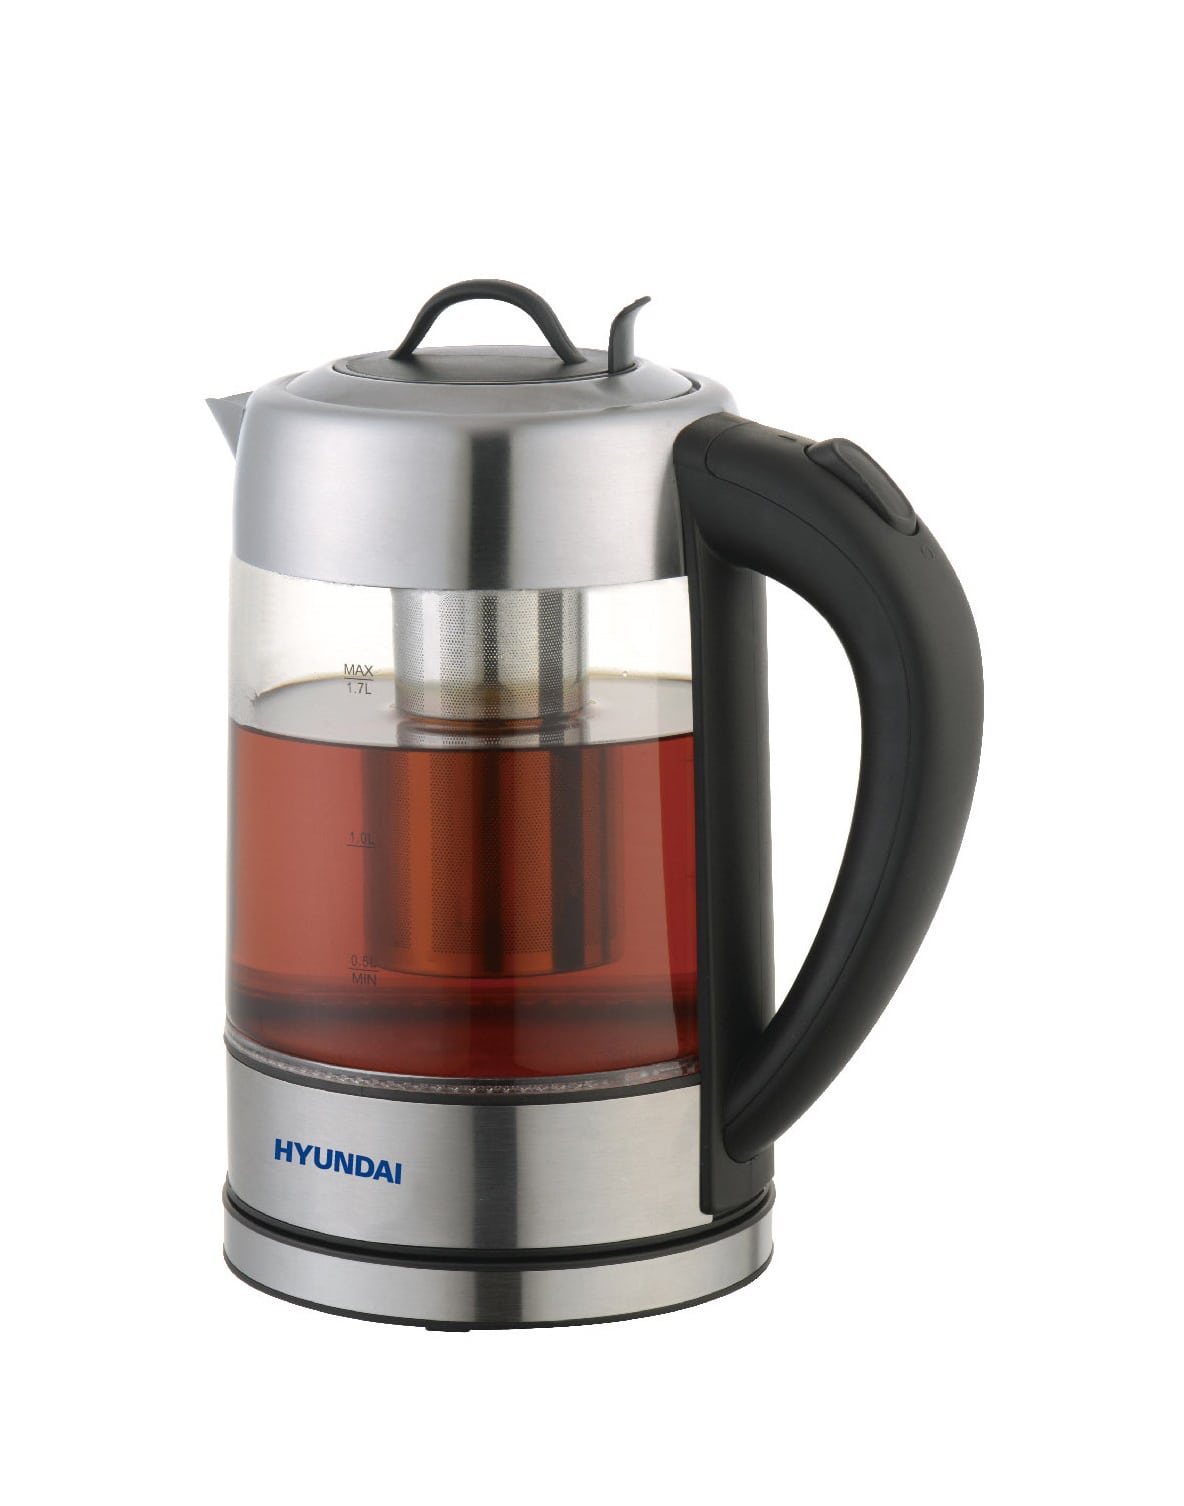 Hyundai 2-in-1 Glass Electric Kettle